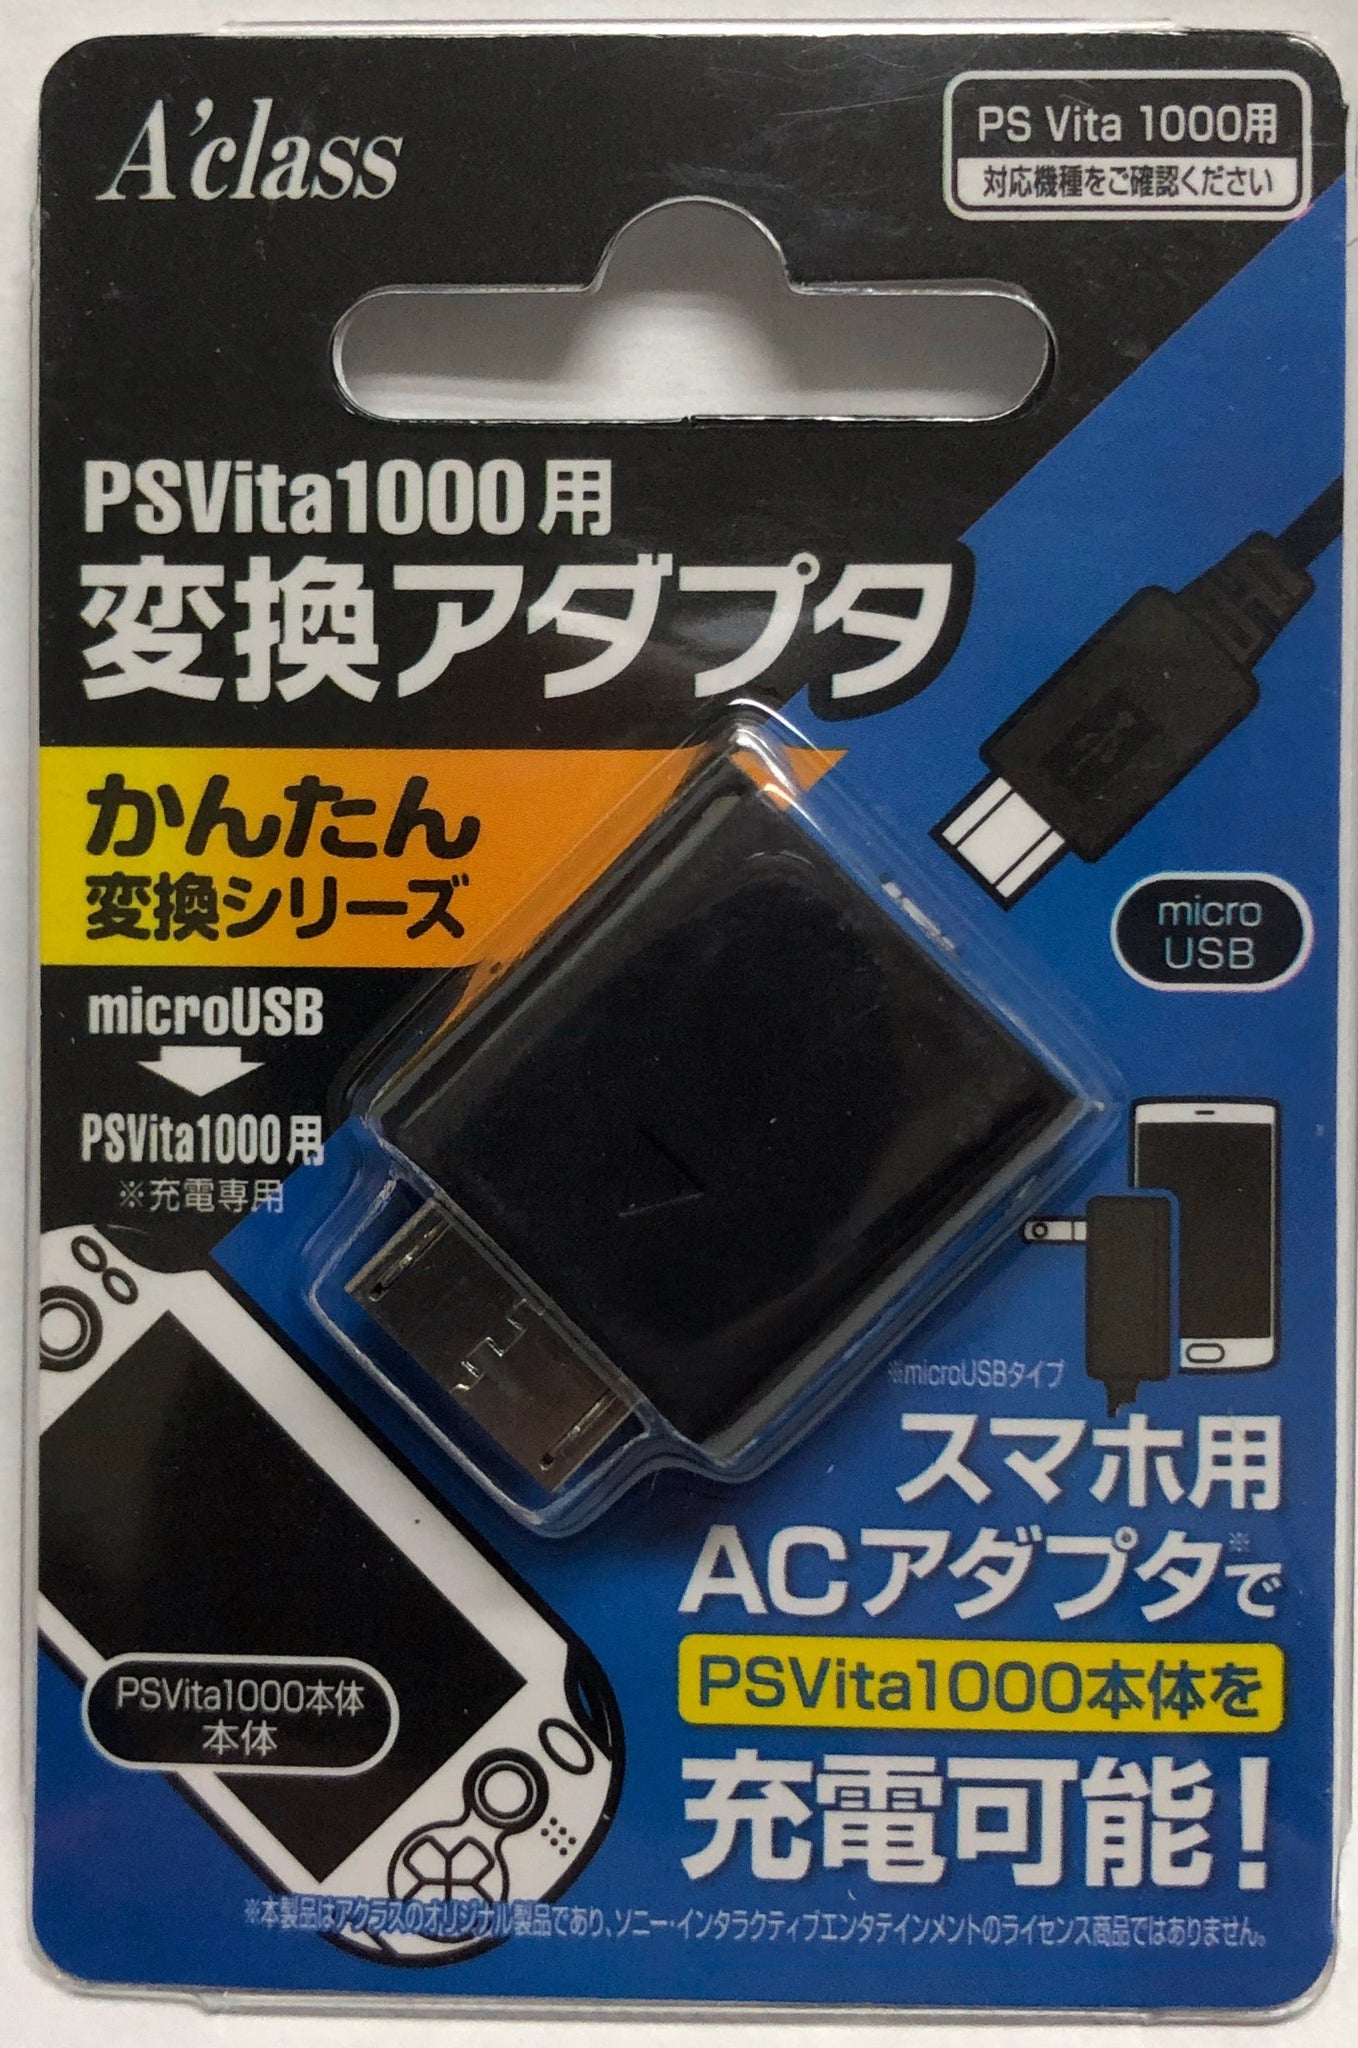 PS Vita (1000 model) charger converter – The Brewing Academy